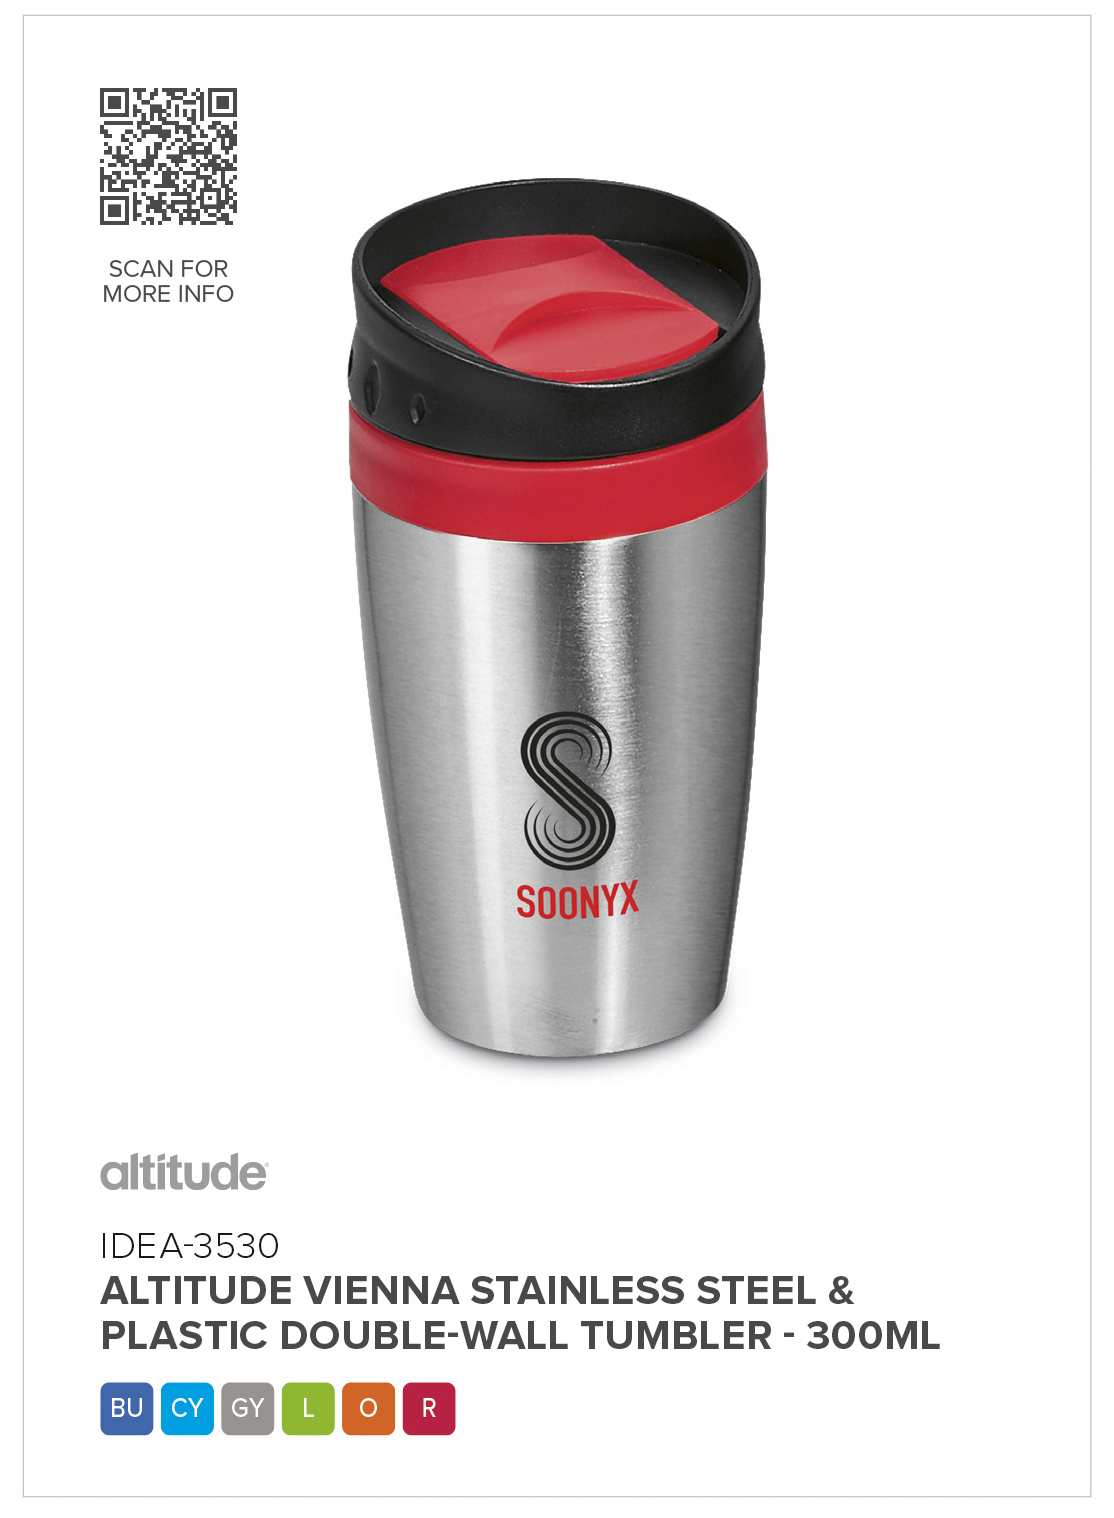 Altitude Vienna Stainless Steel & Plastic Double-Wall Tumbler - 300ml CATALOGUE_IMAGE